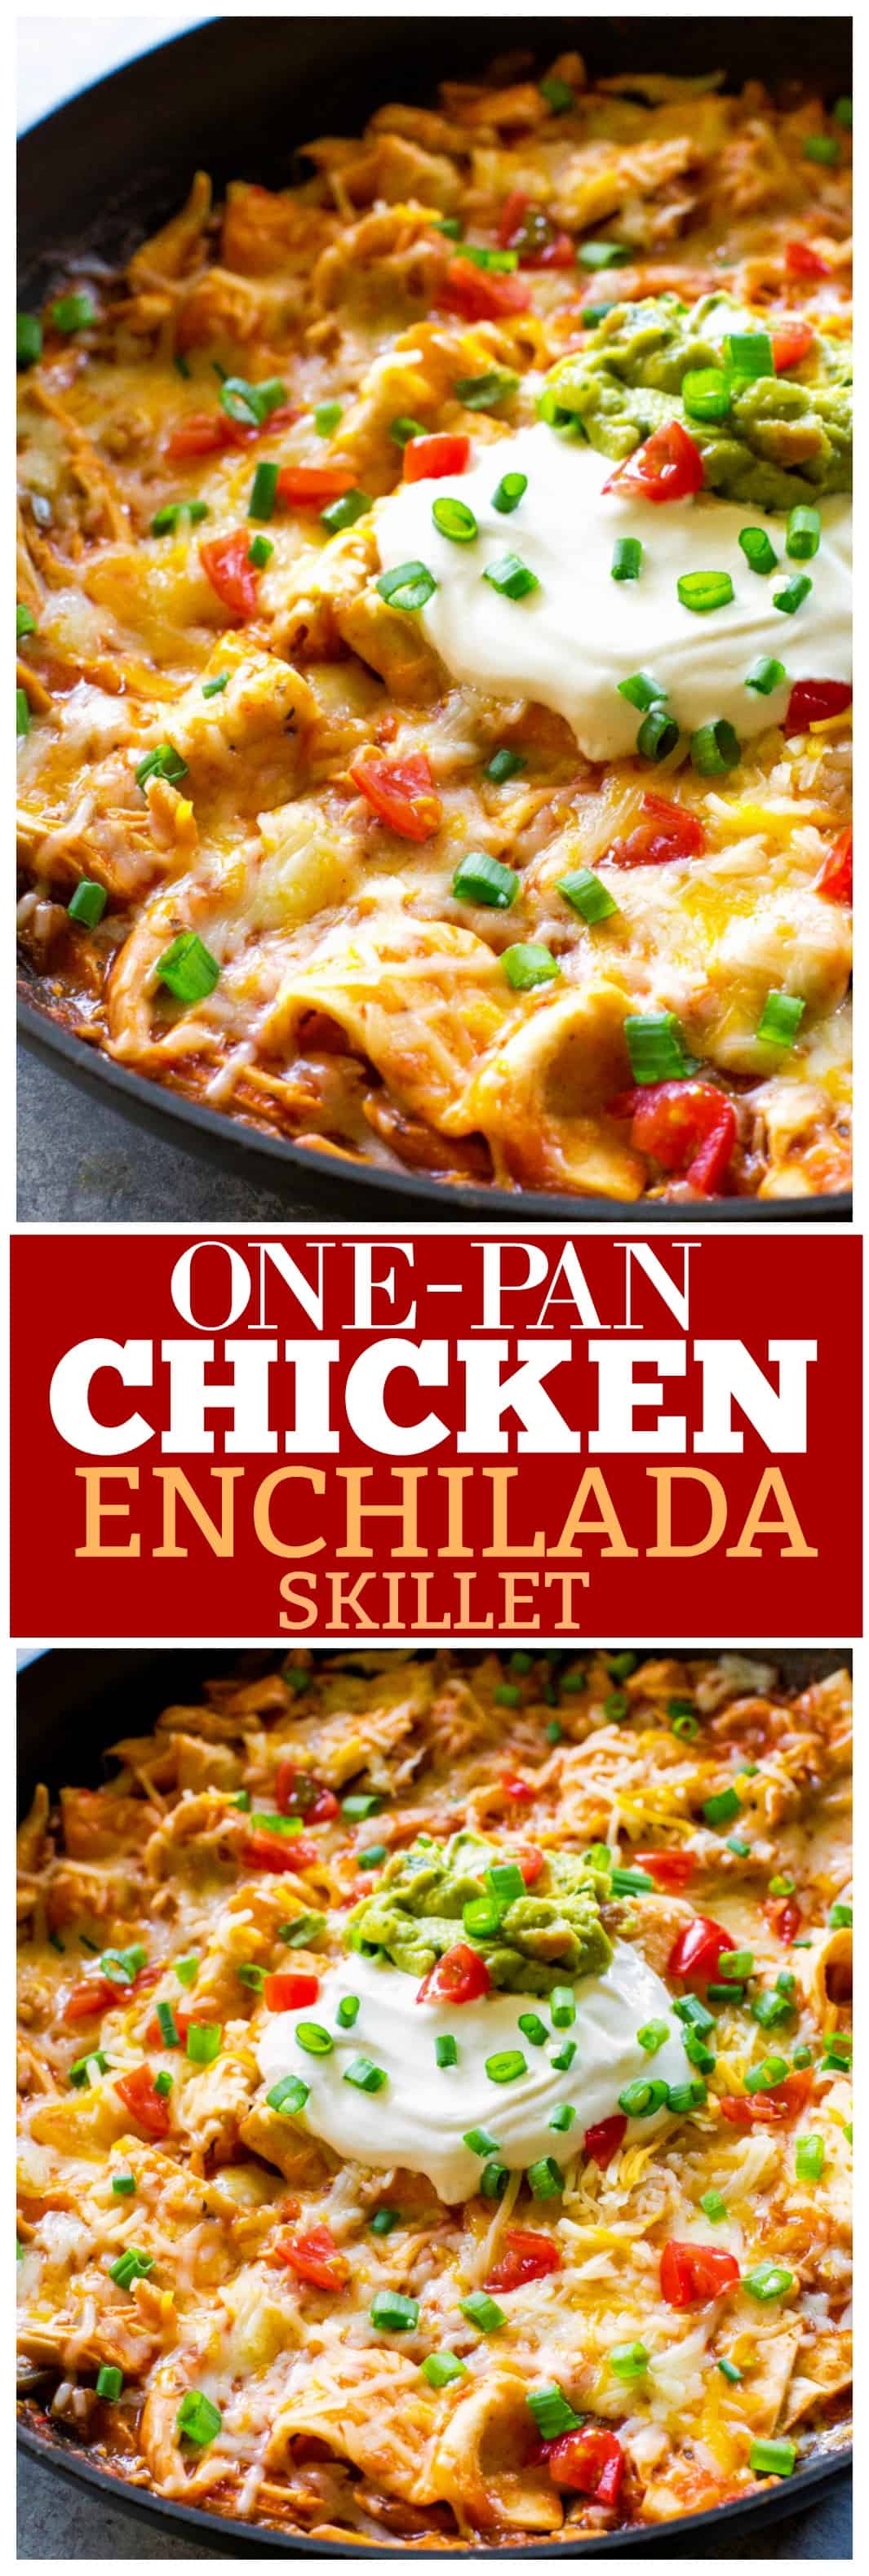 https://www.the-girl-who-ate-everything.com/wp-content/uploads/2018/03/one-pan-chicken-enchilada-skillet-2.jpg